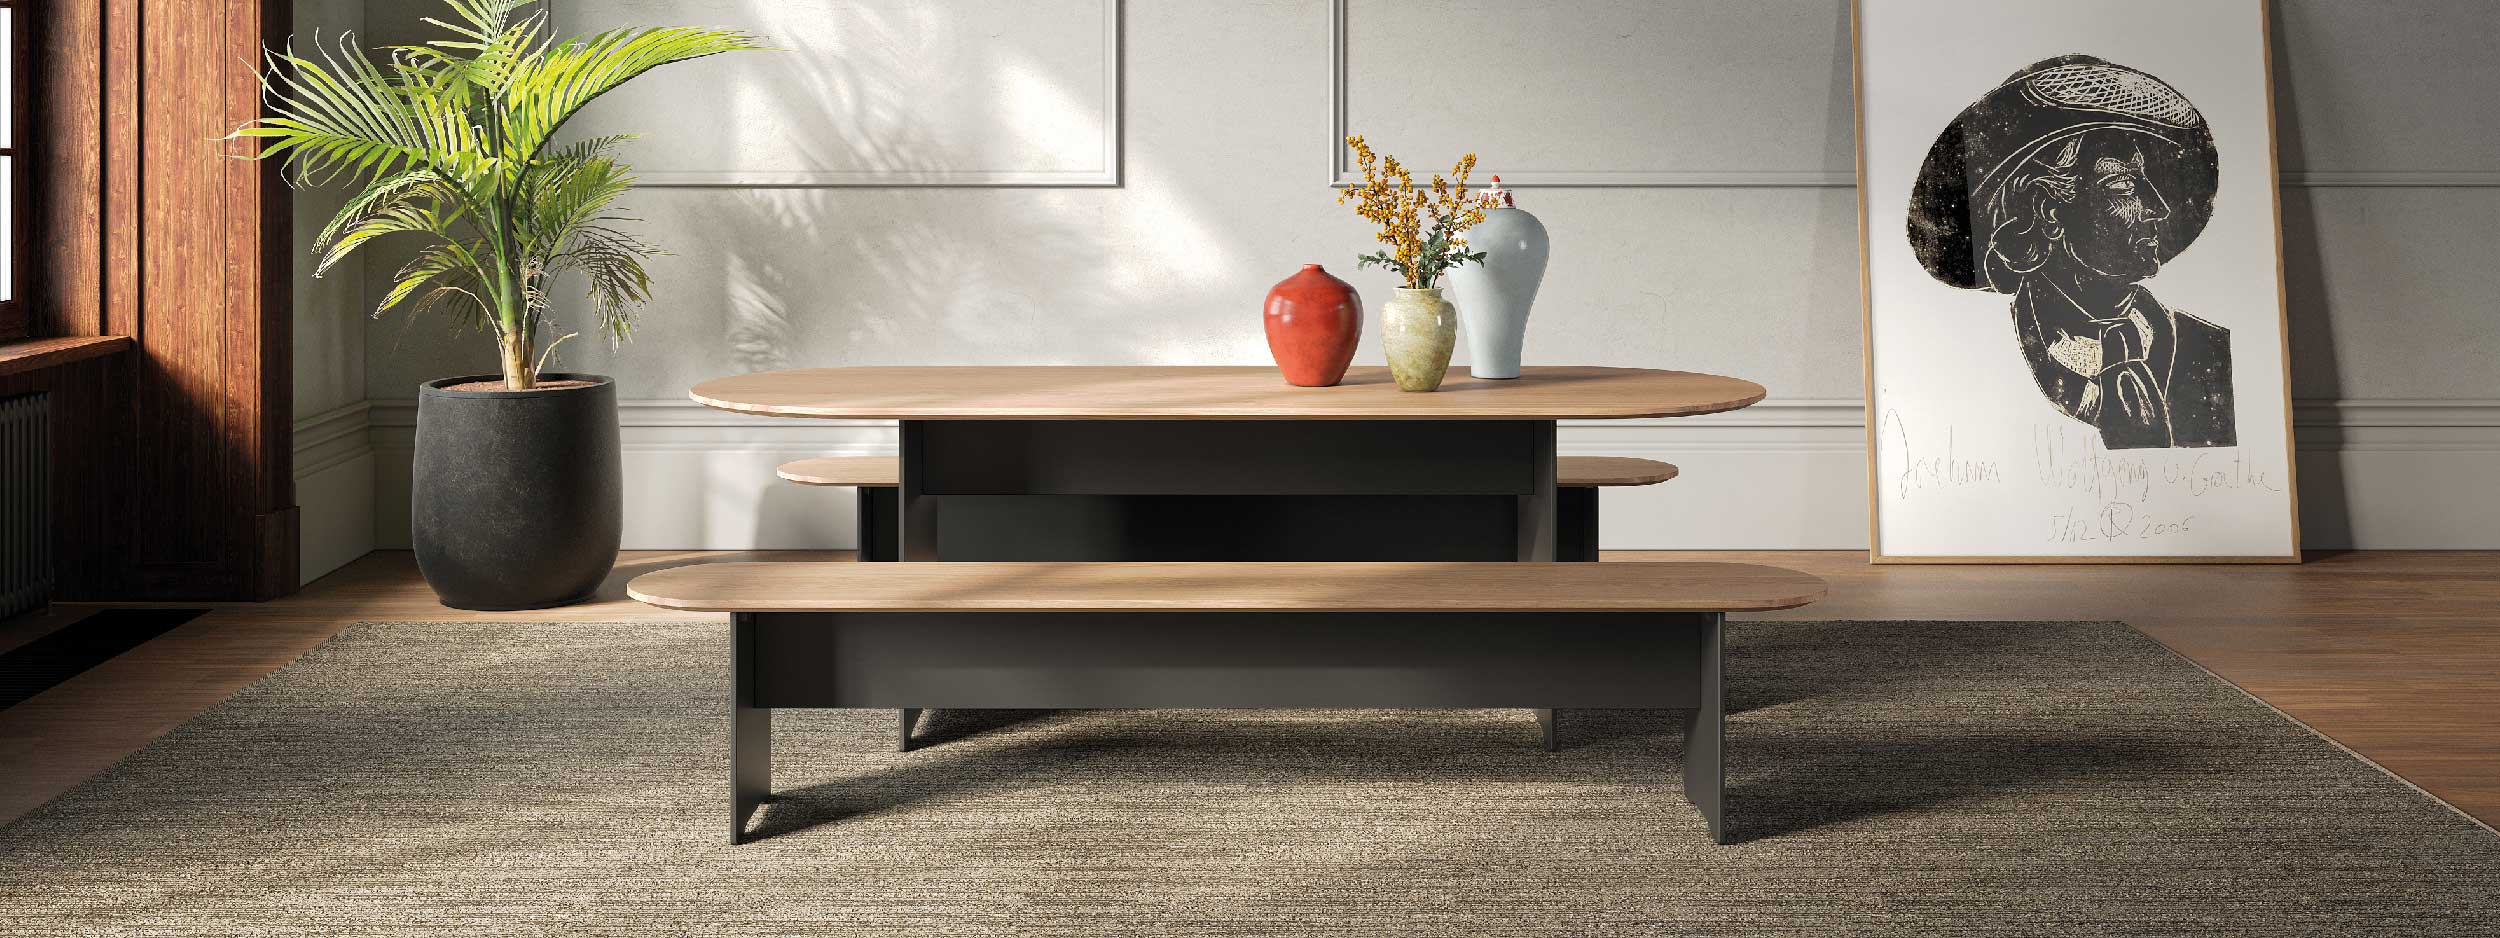 Image of Riva Round modern table and benches in anthracite HPL and oak in minimalist interior setting